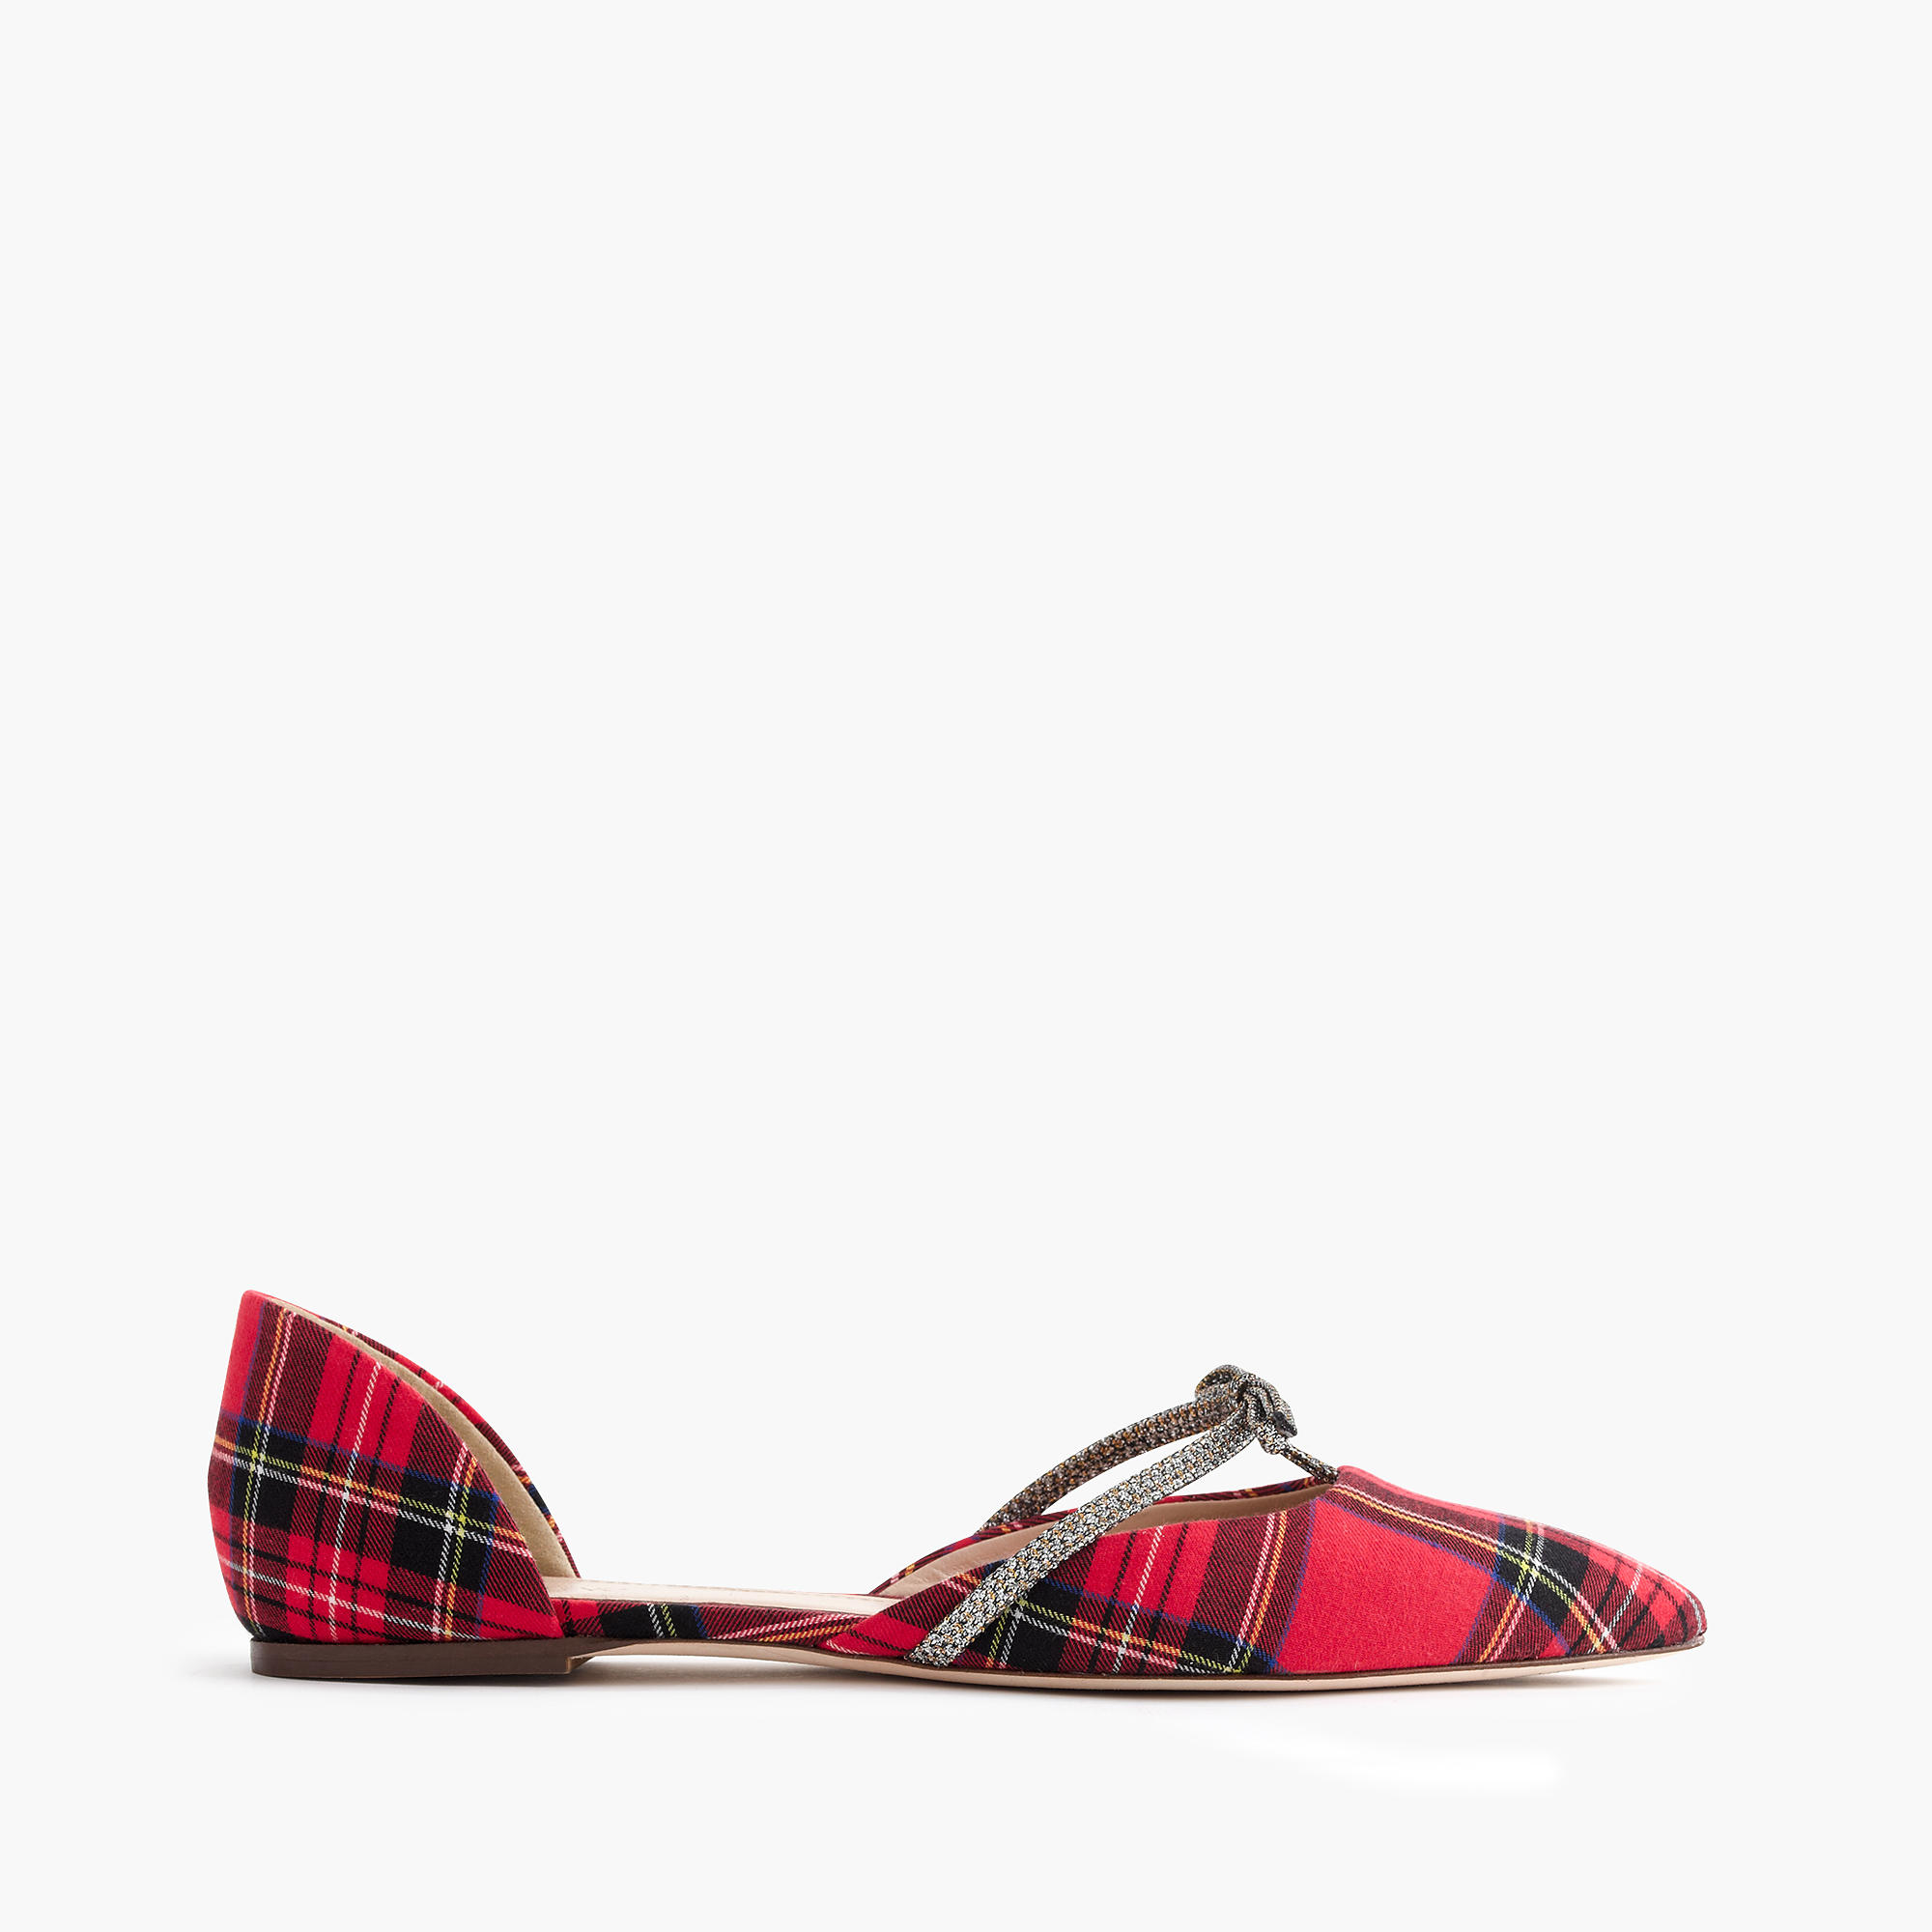 Lyst - J.Crew Sloan Plaid D'orsay Flats With Mini Bow in Red